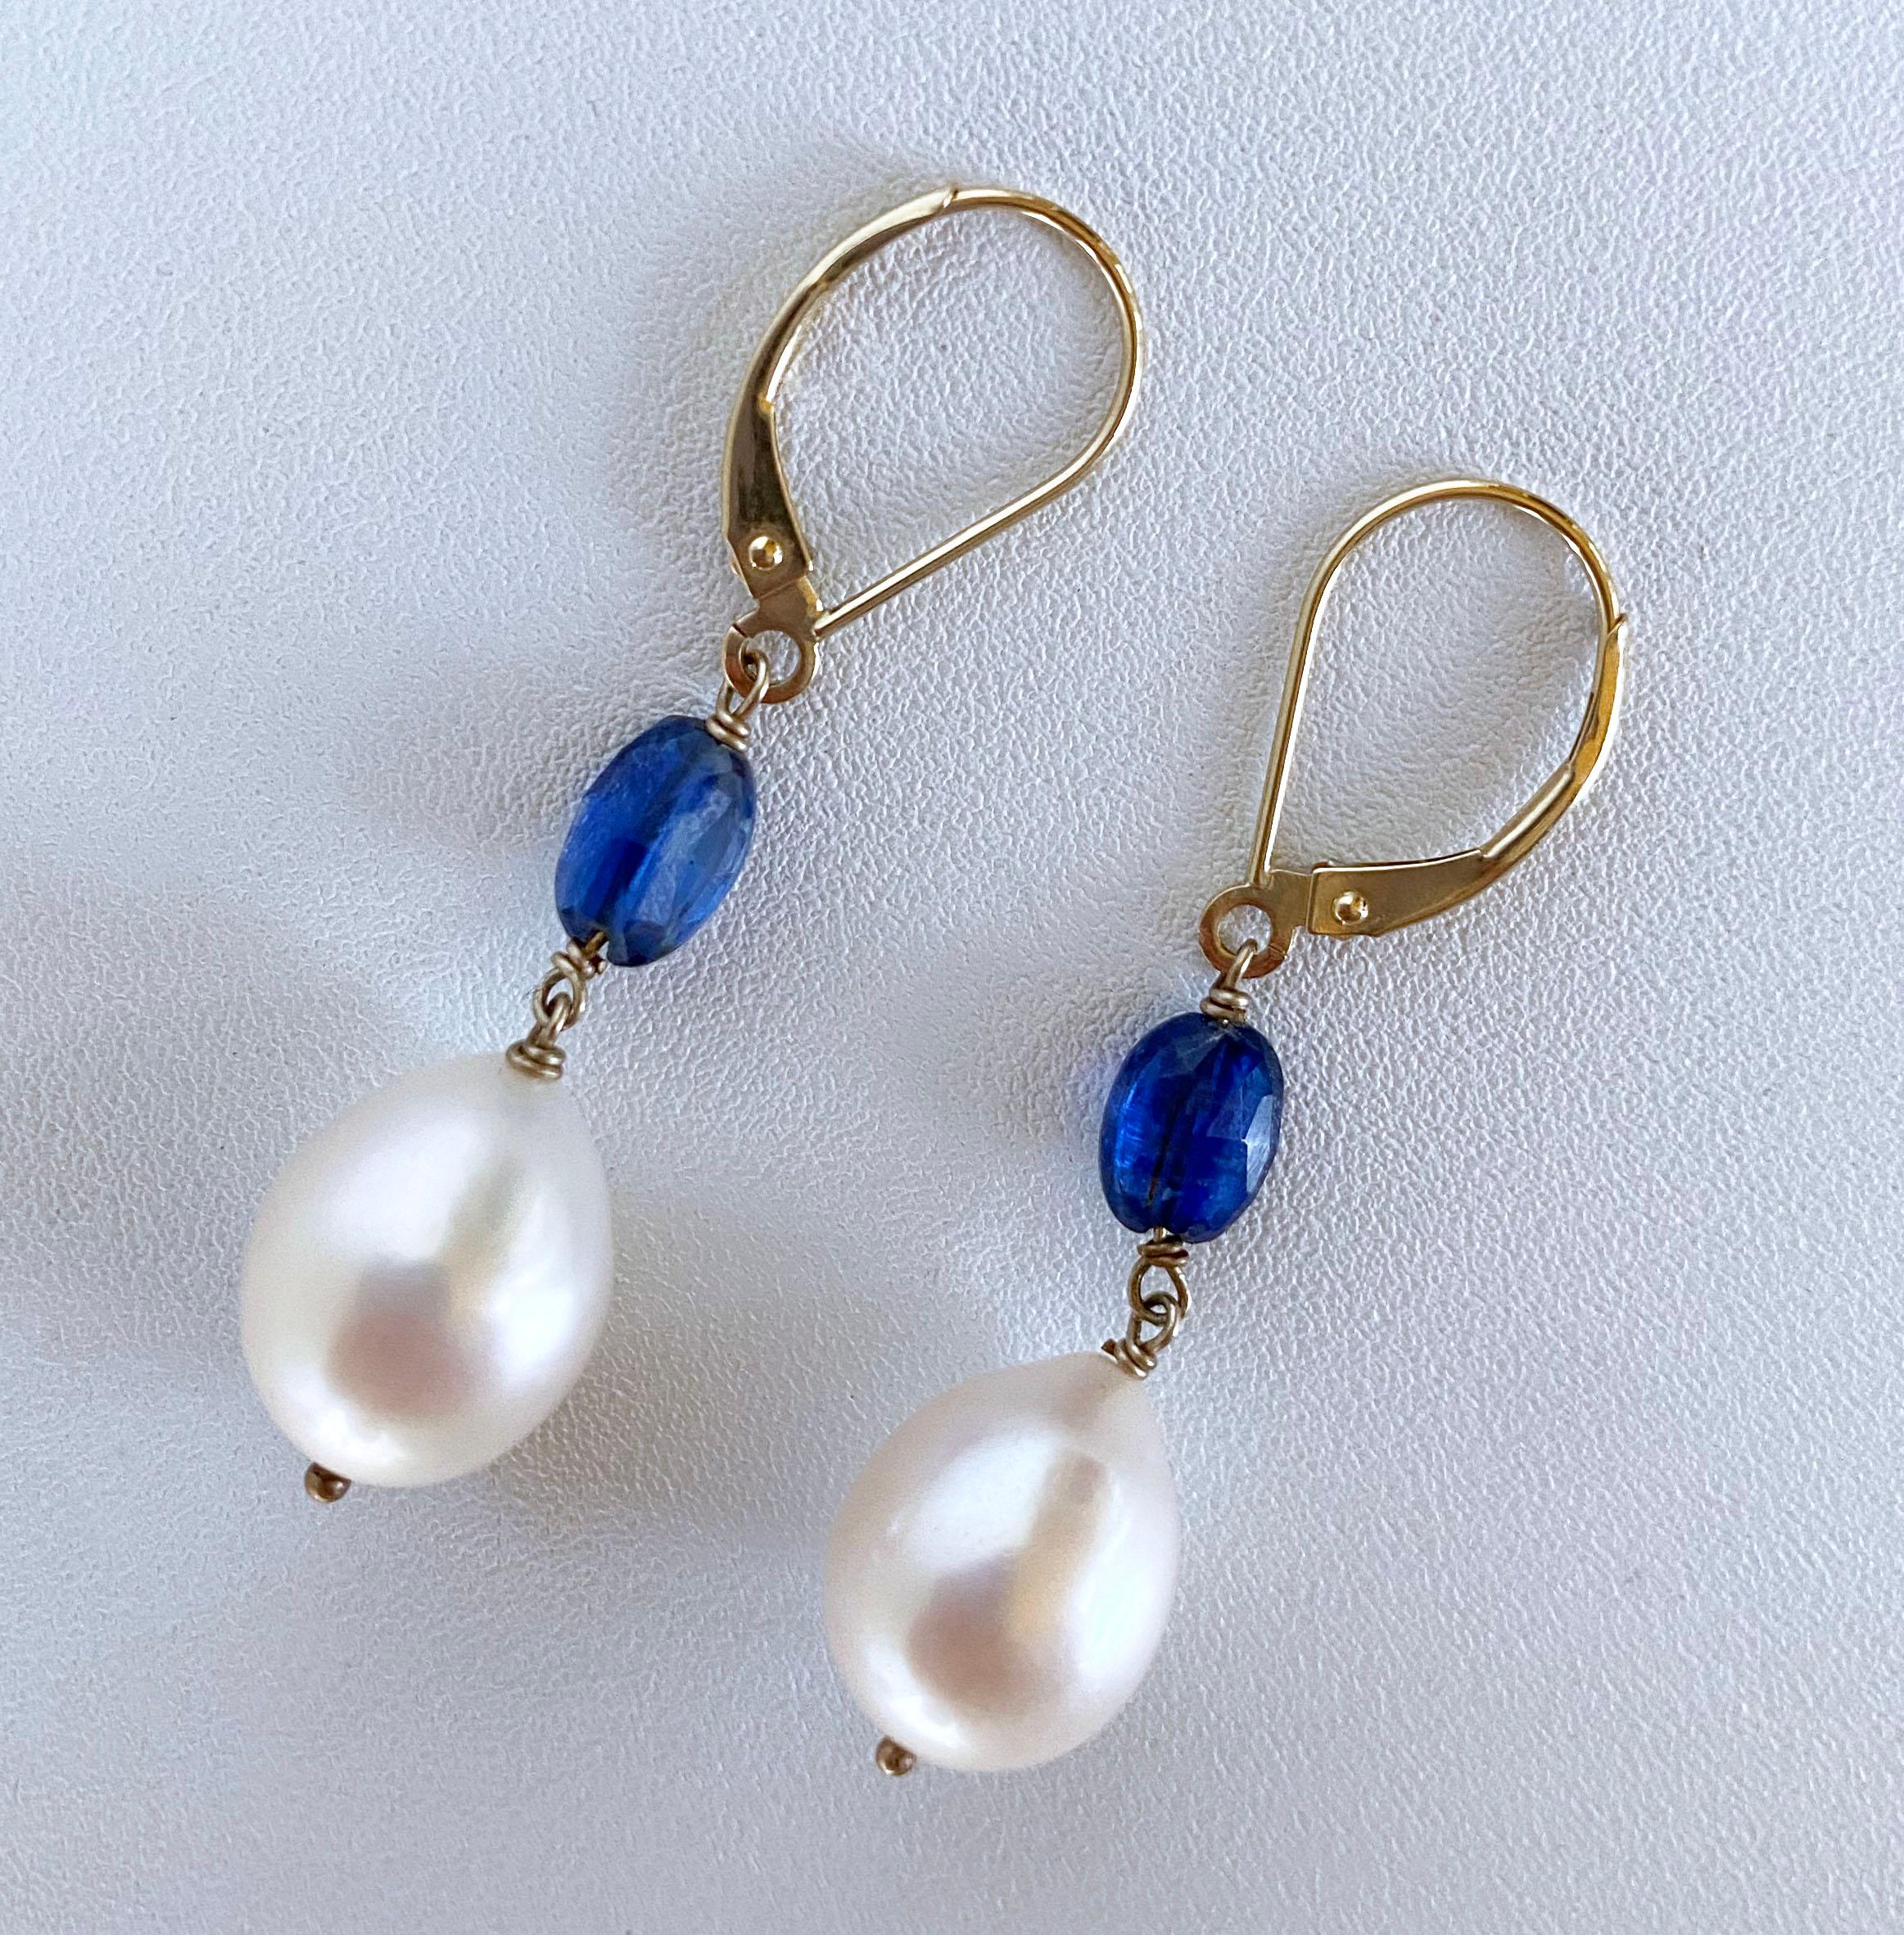 Gorgeous and simple pair of earrings made by Marina J. In Los Angeles. This pair features two gorgeous flat and faceted Blue Kyanite oval beads from which slightly Baroque Cream Pearls hang. The Kyanite’s translucency allows it to radiate stunning